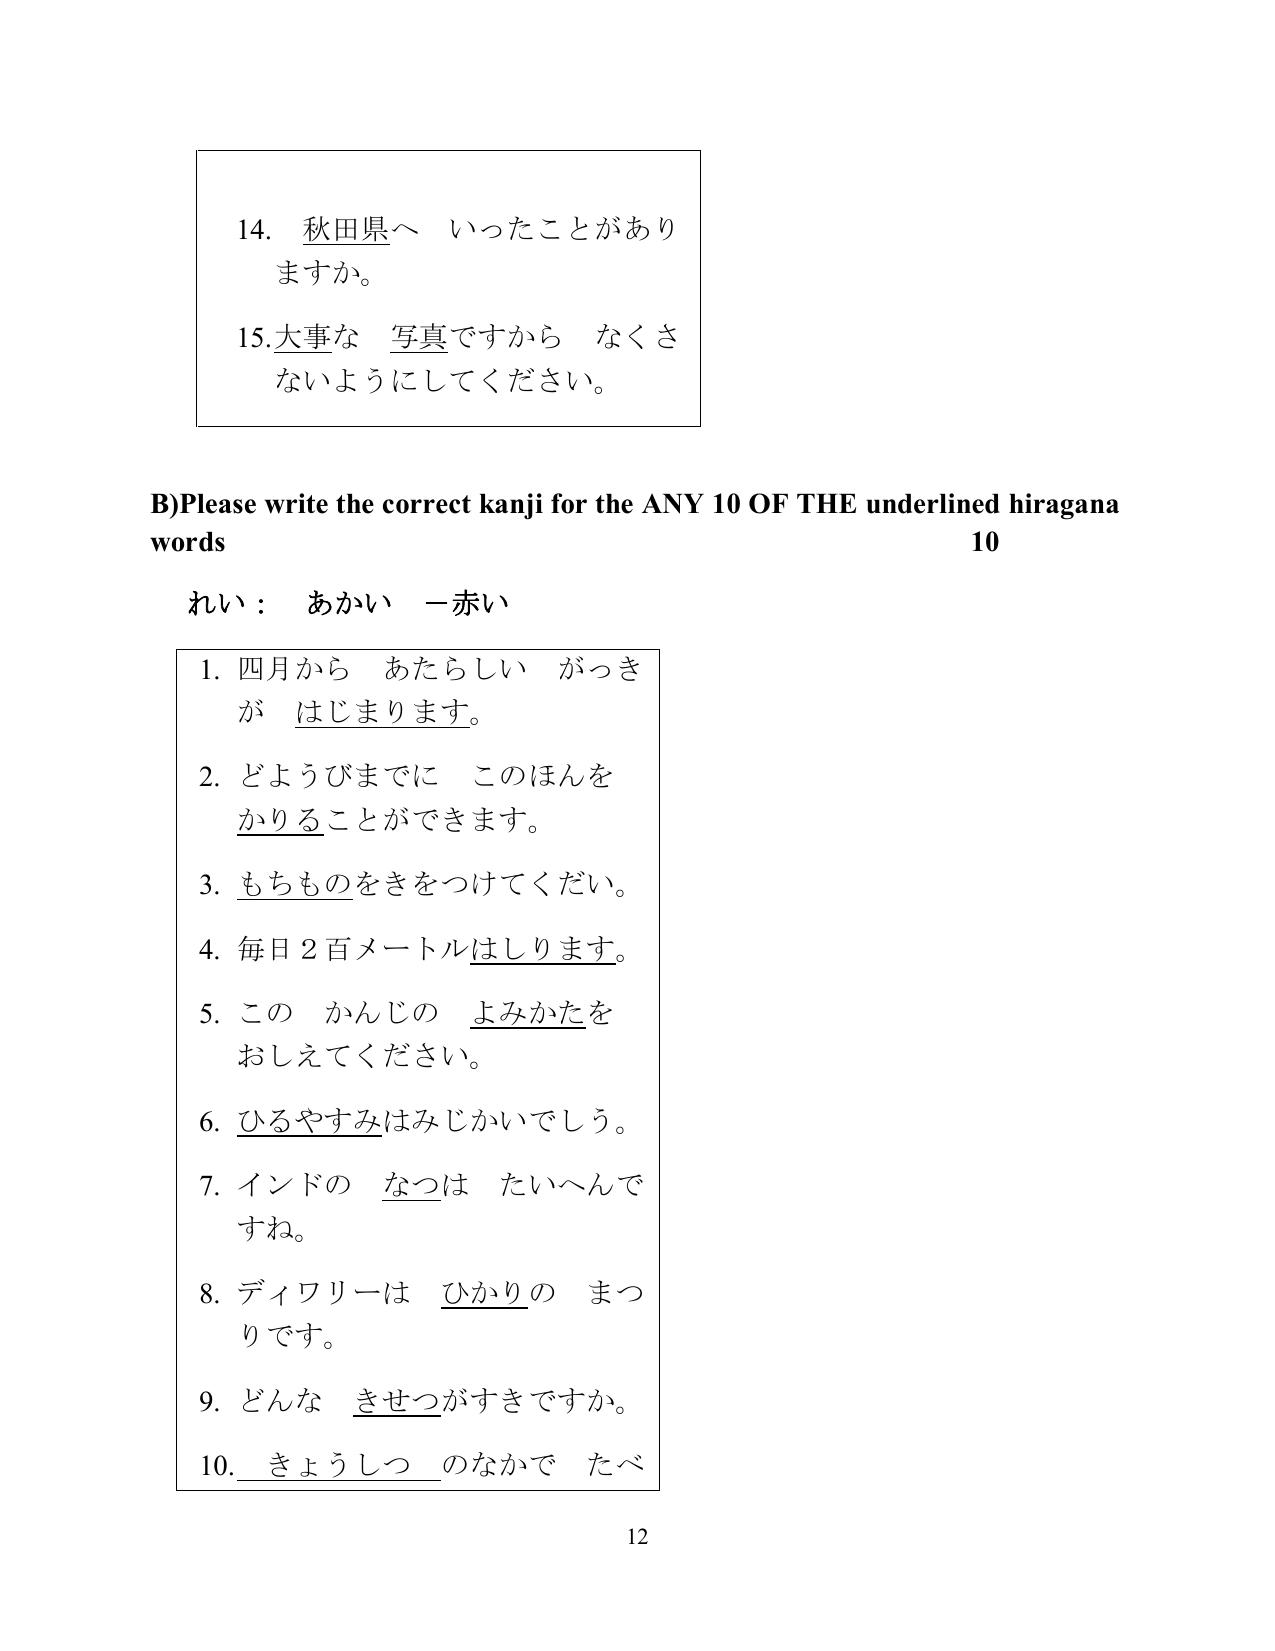 CBSE Class 12 Japanese -Sample Paper 2019-20 - Page 12